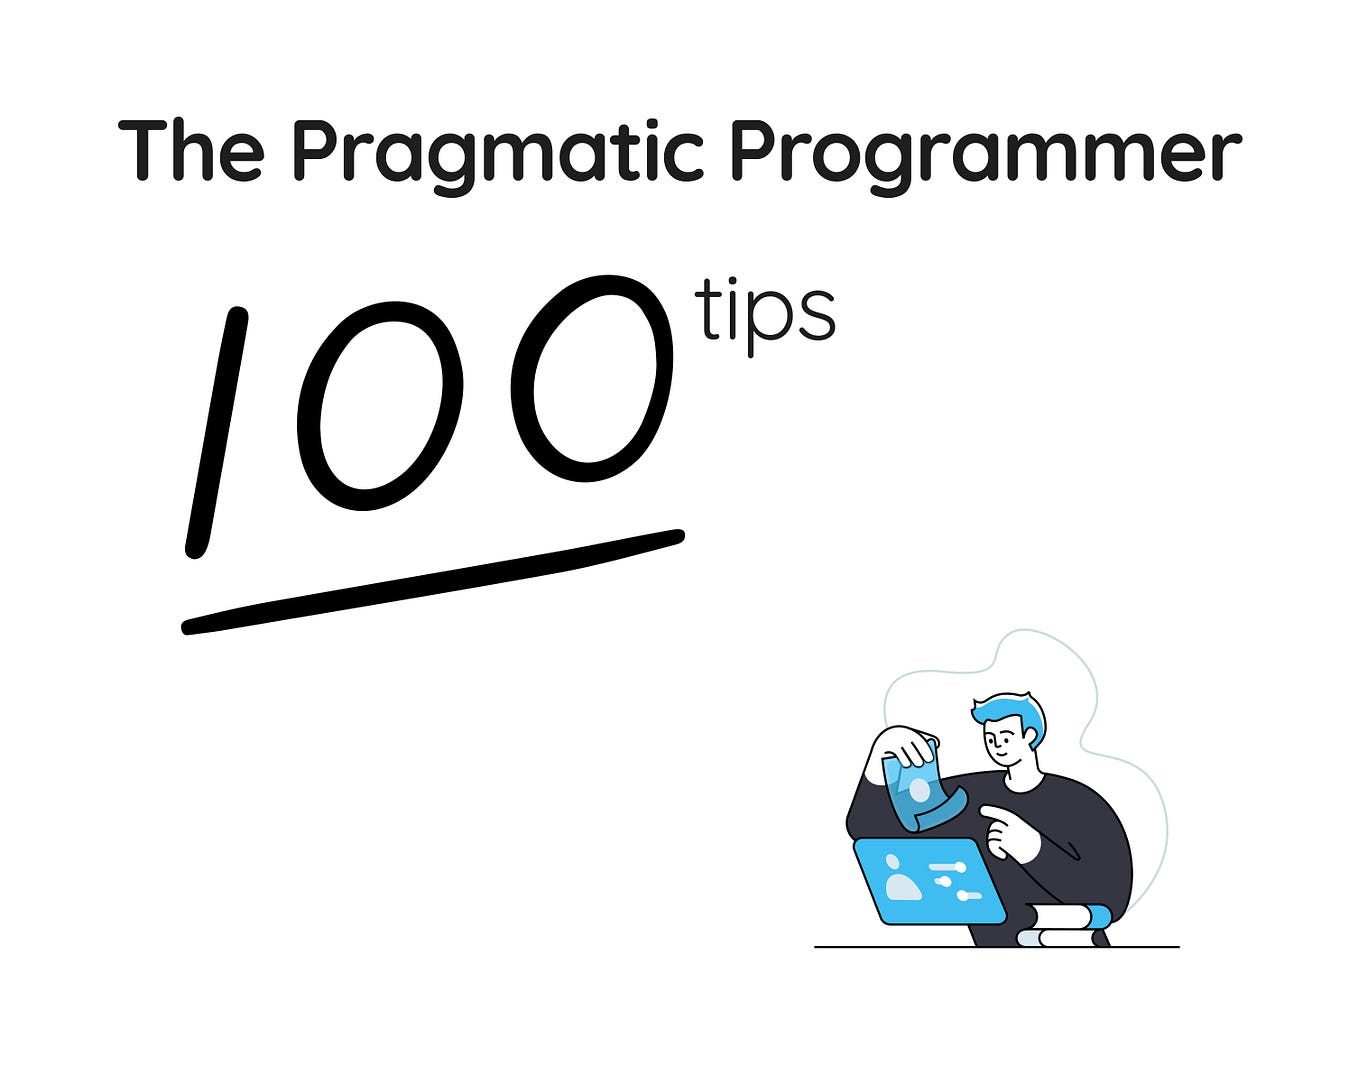 100 tips from ‘The Pragmatic Programmer’ book